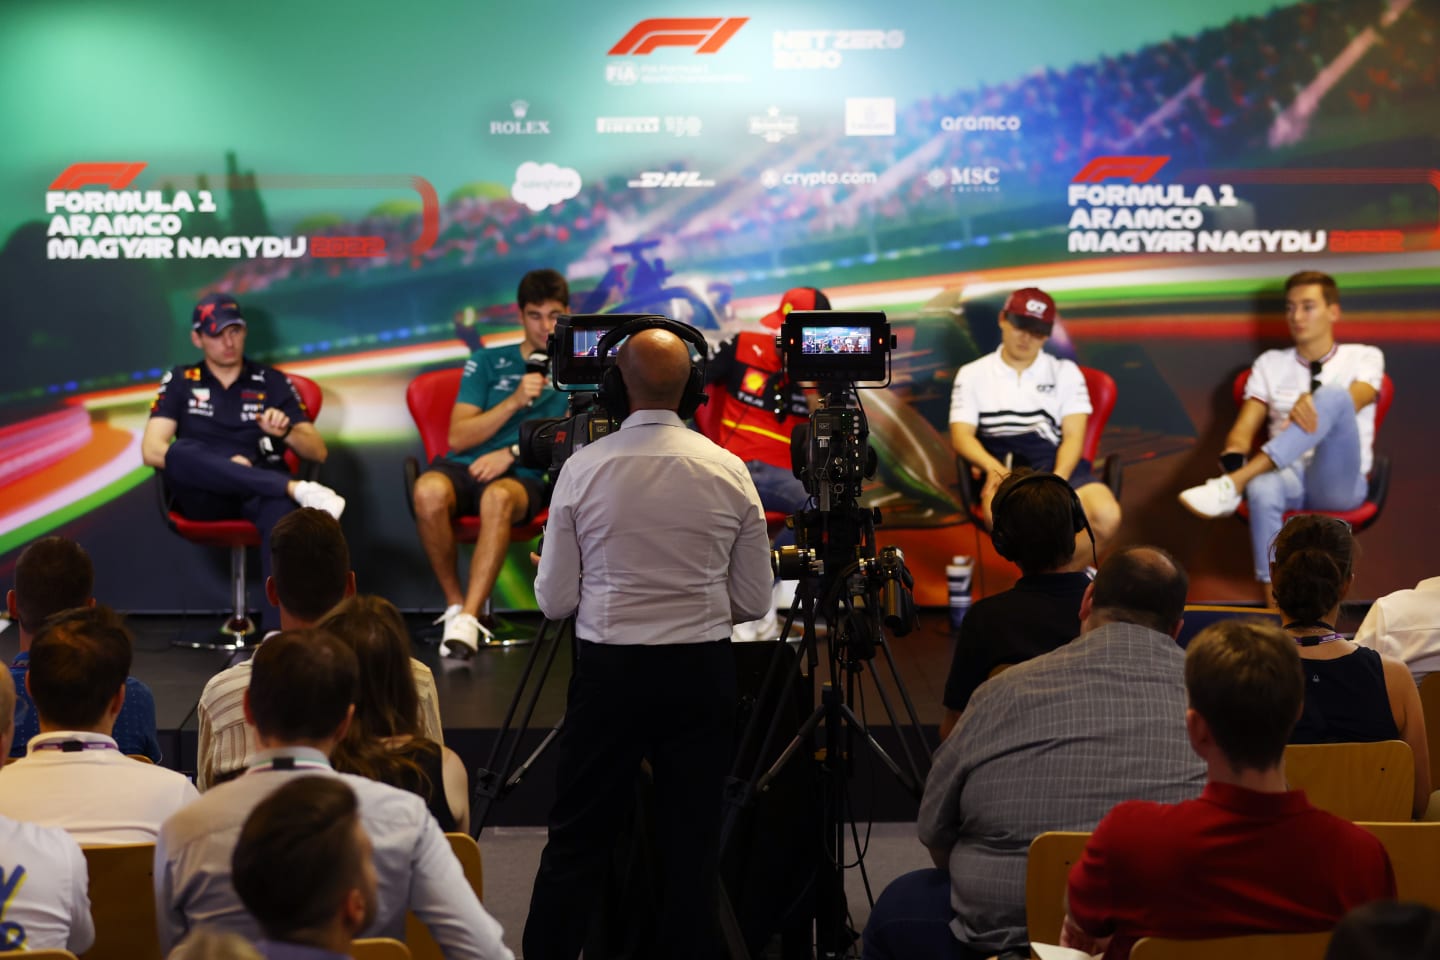 BUDAPEST, HUNGARY - JULY 28: A view of the camera operator in the Drivers Press Conference during previews ahead of the F1 Grand Prix of Hungary at Hungaroring on July 28, 2022 in Budapest, Hungary. (Photo by Bryn Lennon/Getty Images)